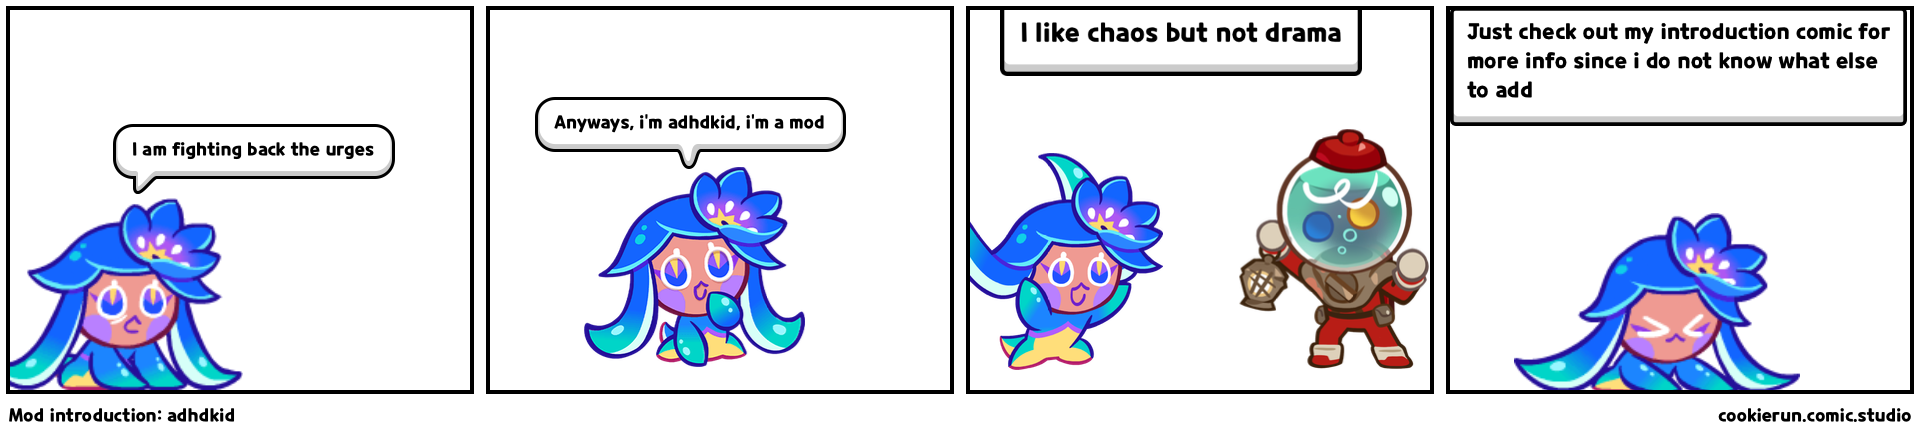 I am back to cause more chaos - Comic Studio